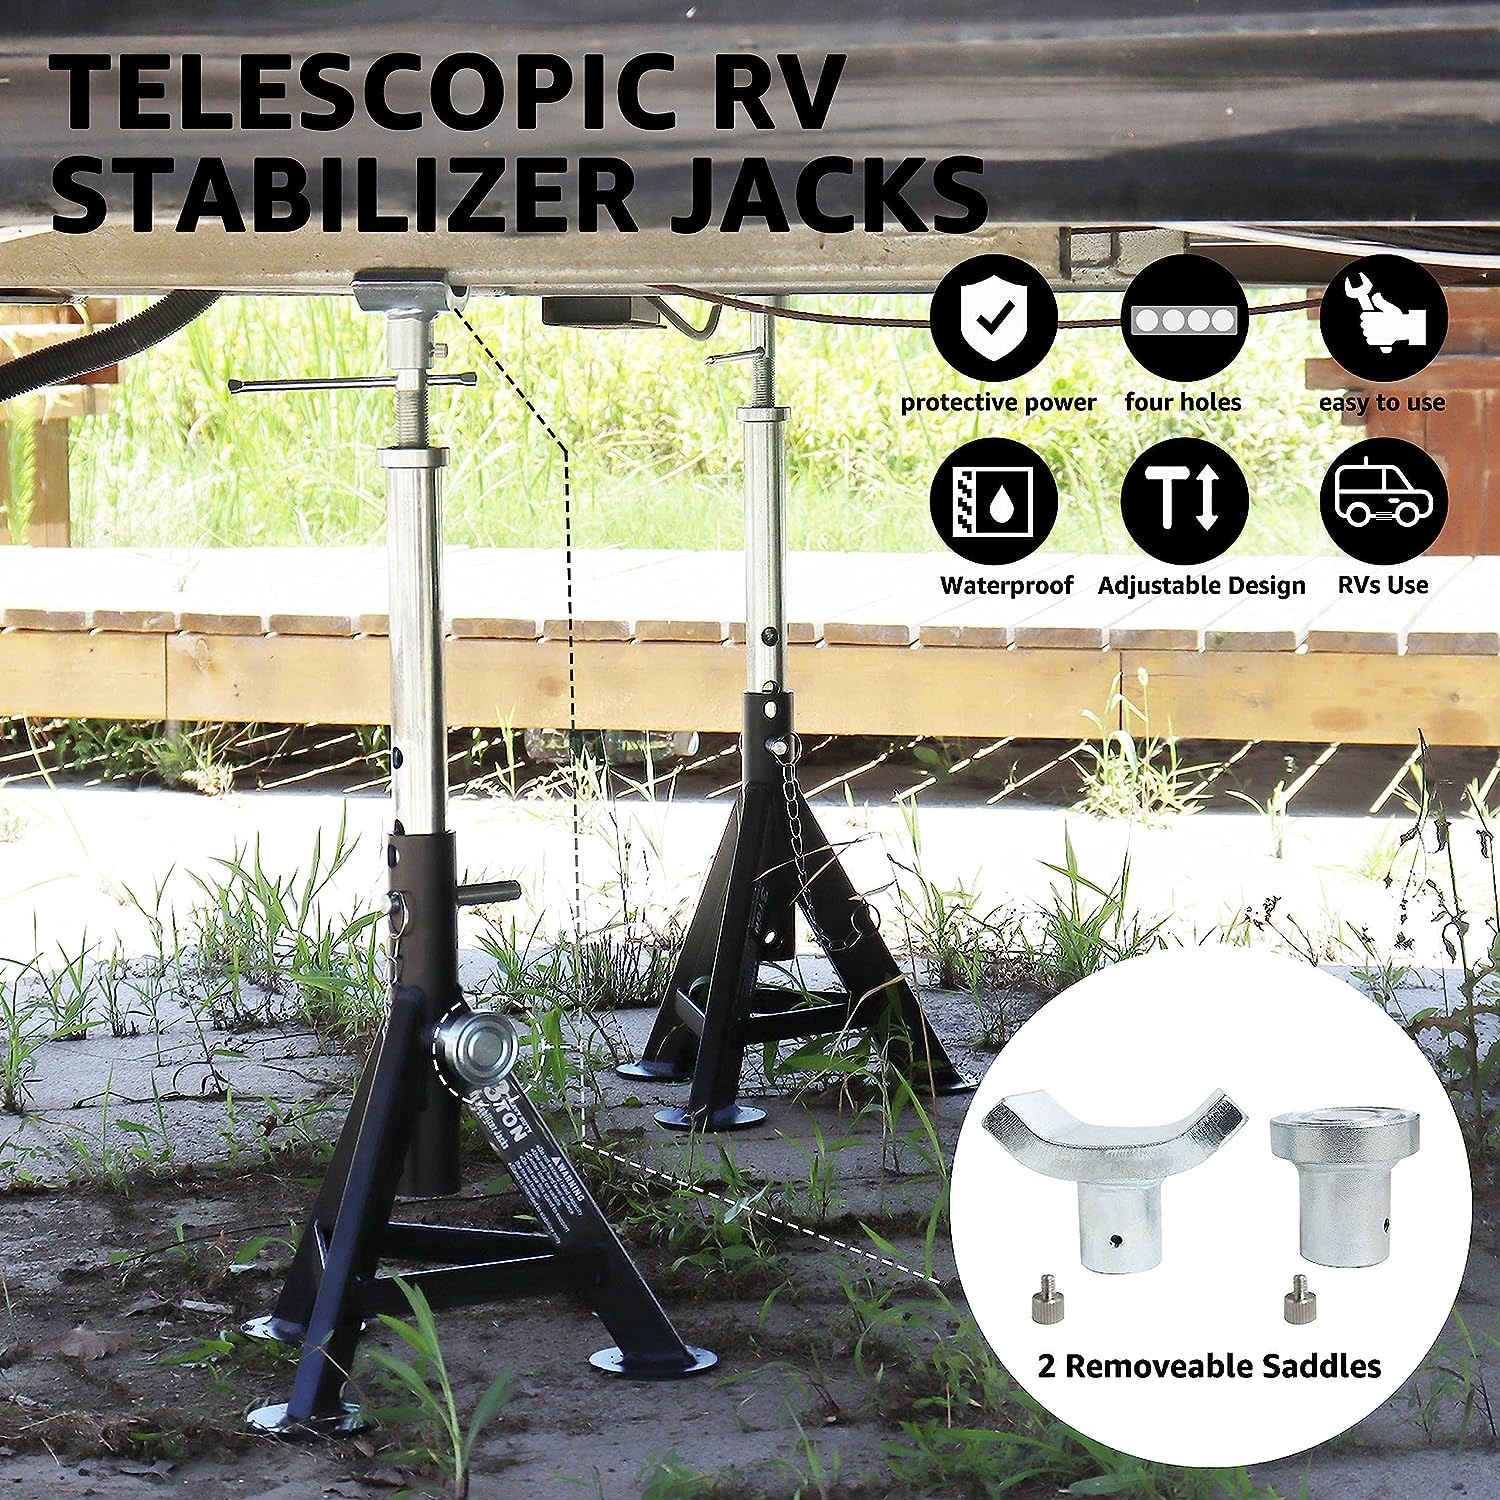 BESTOOL Set of 2 RV Stabilizer Jacks Camper Leveling, Adjustable Height 17.3" to 30", Heavy Duty Telescopic RV Support Jacks for Trailer, Camper, Motorhome, Single Jack Withstand 3 ton 6,000 Lbs